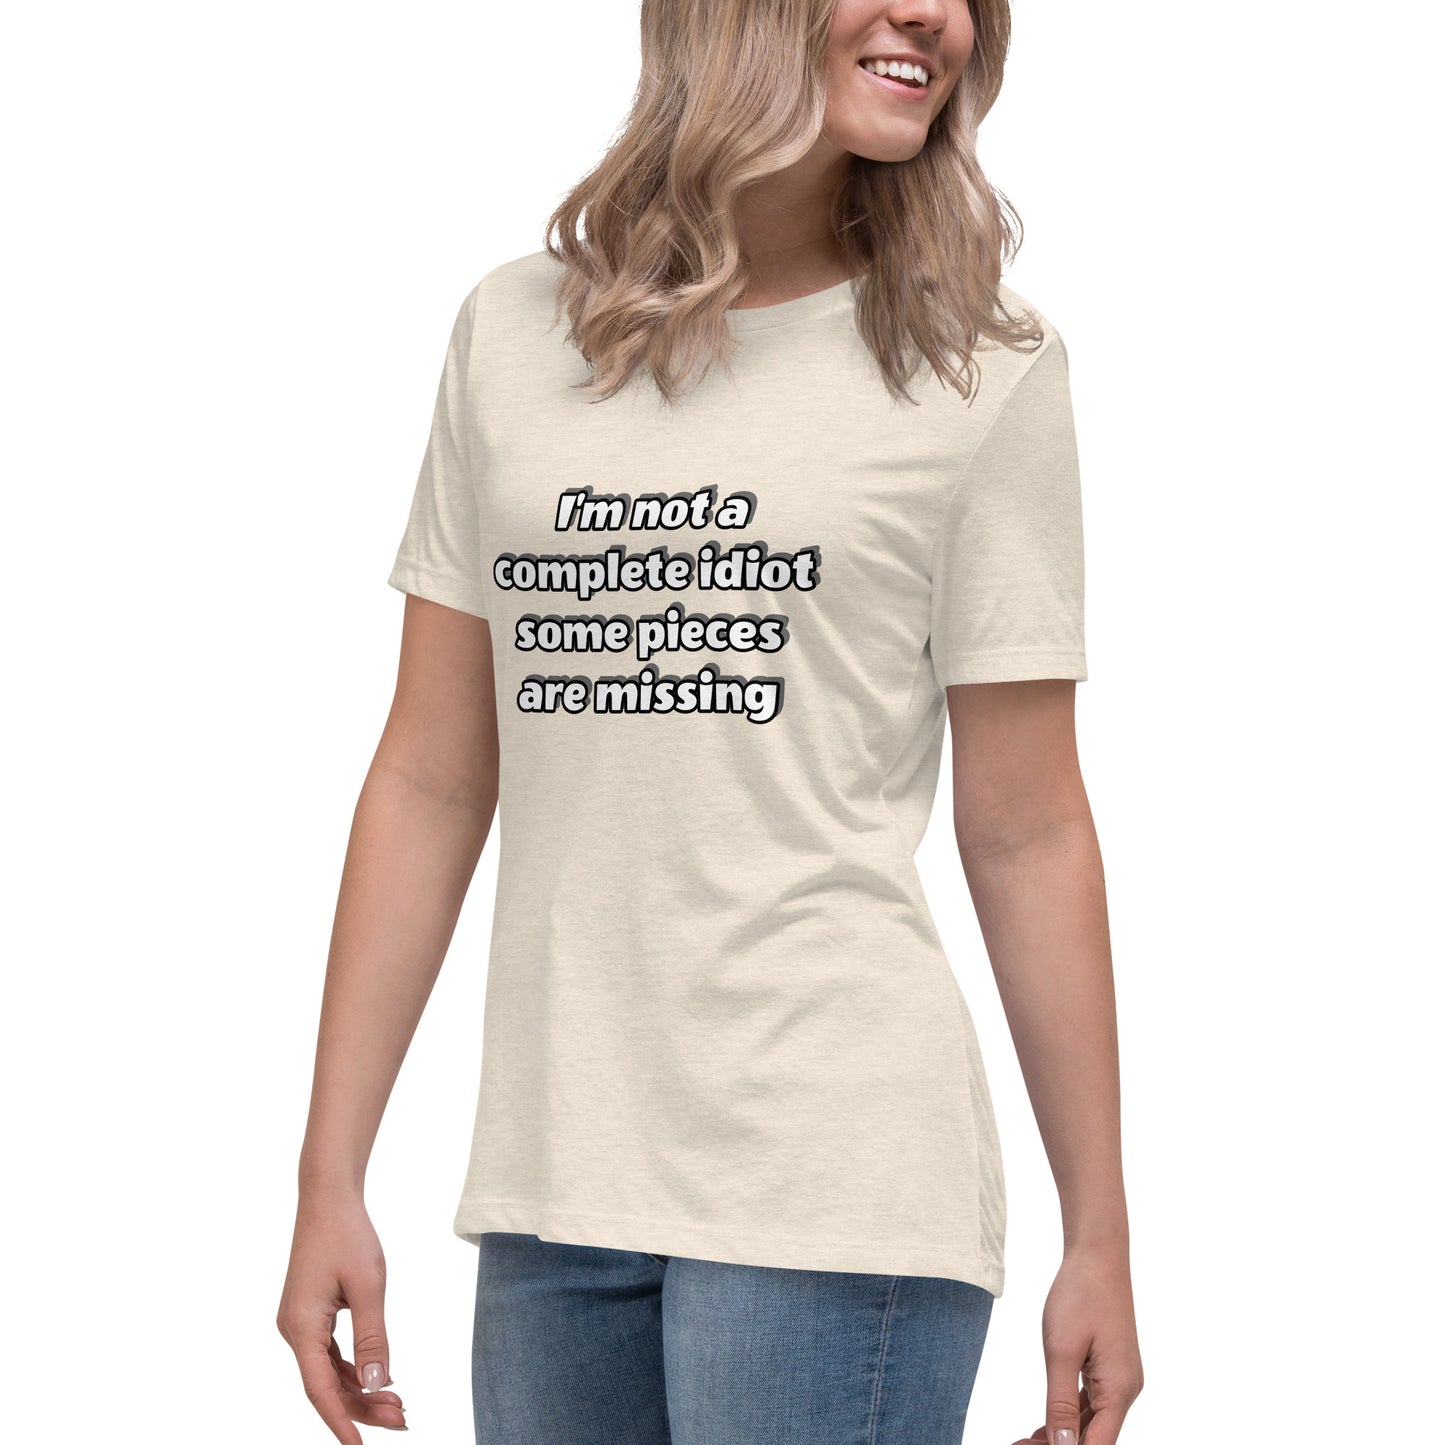 Women with prism t-shirt with text “I’m not a complete idiot, some pieces are missing”